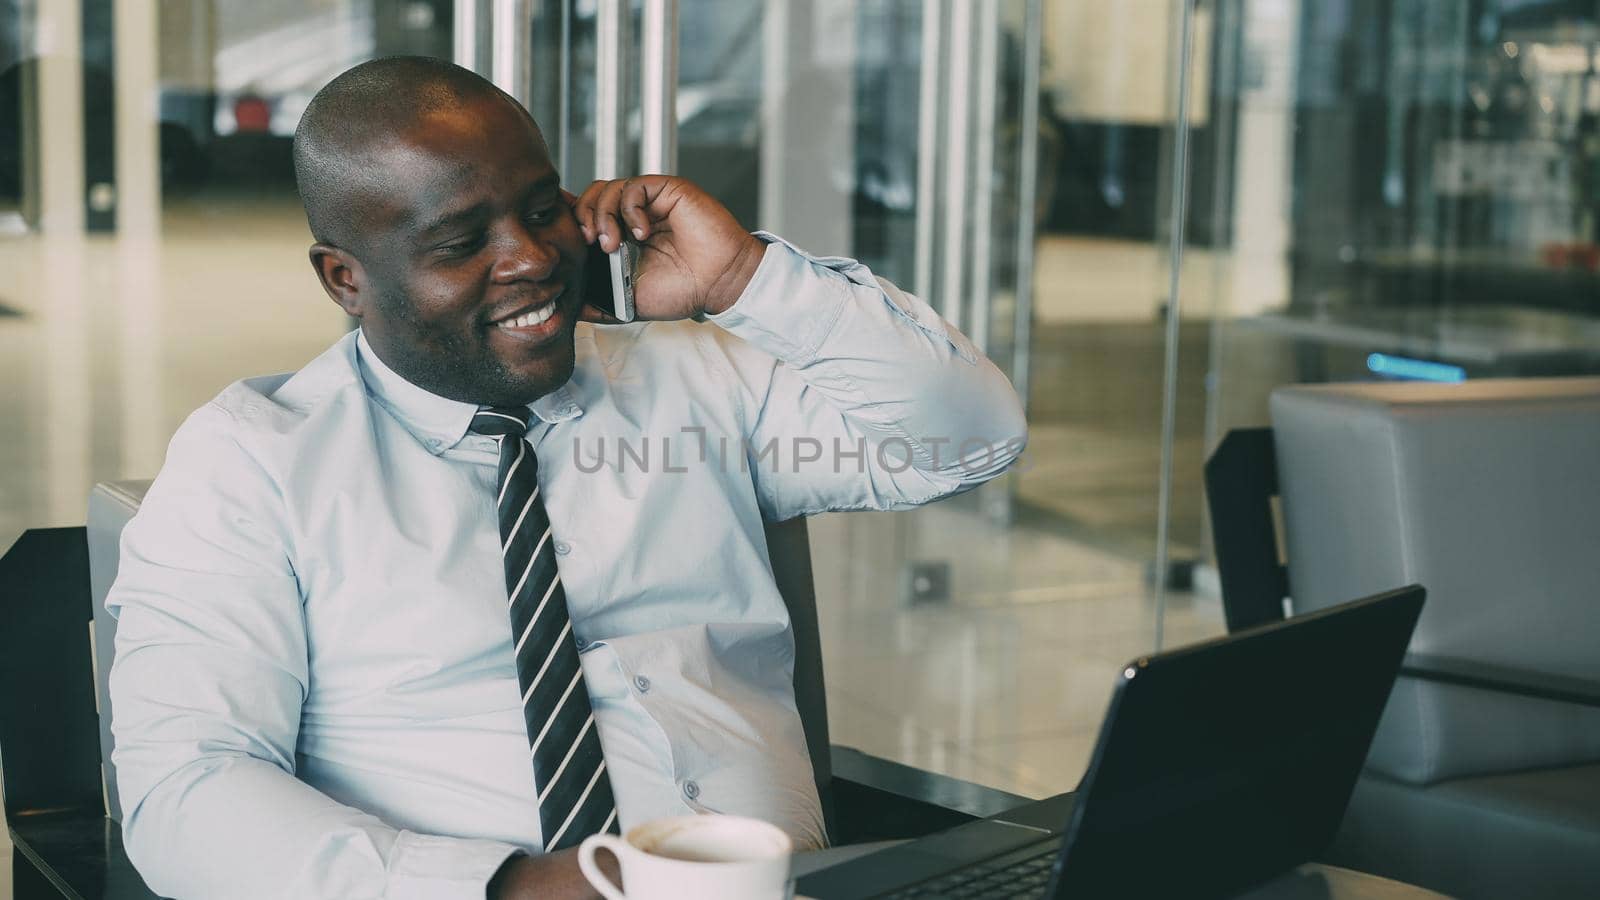 Portrait of African American businessman in formal clothes talking on his smartphone and browsing net while looking at his laptop in modern cafe during lunch time. He looks ambitious and successful.